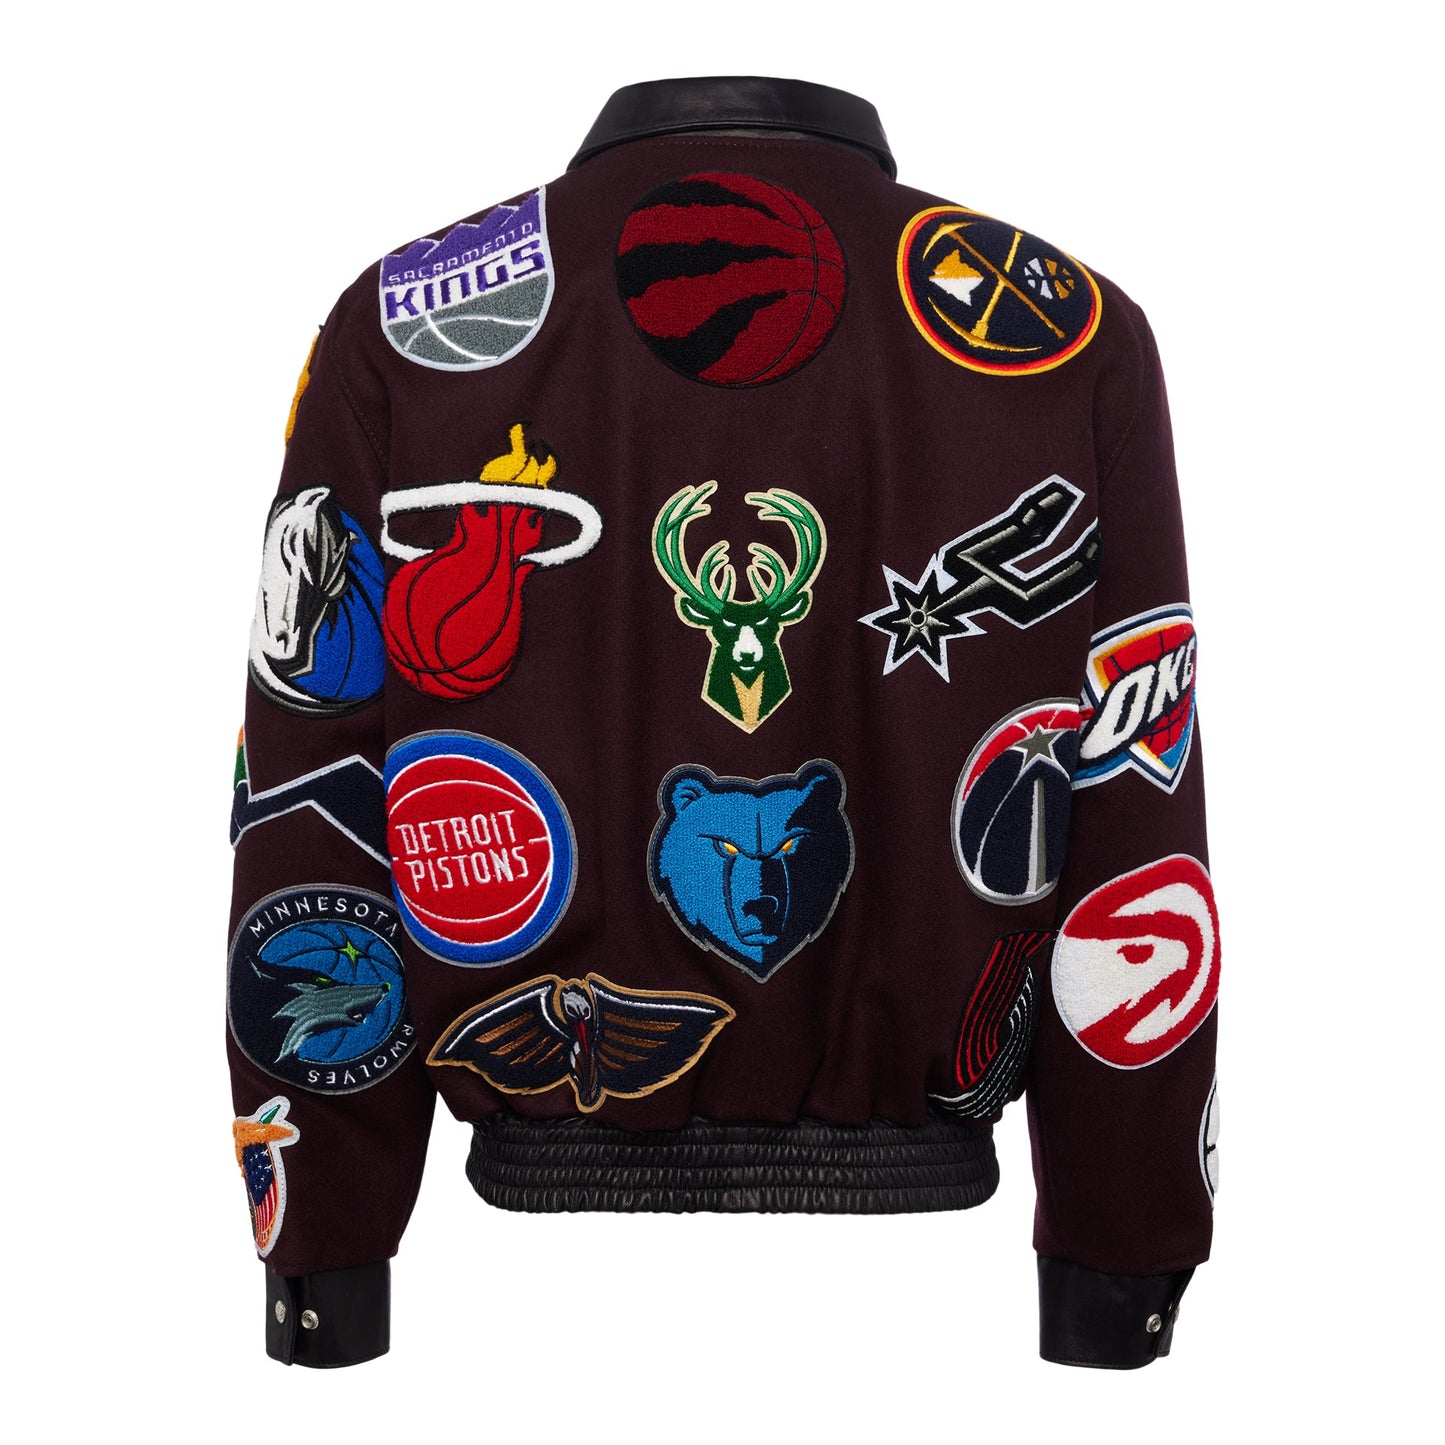 Copy of NBA COLLAGE WOOL & LEATHER JACKET MAROON